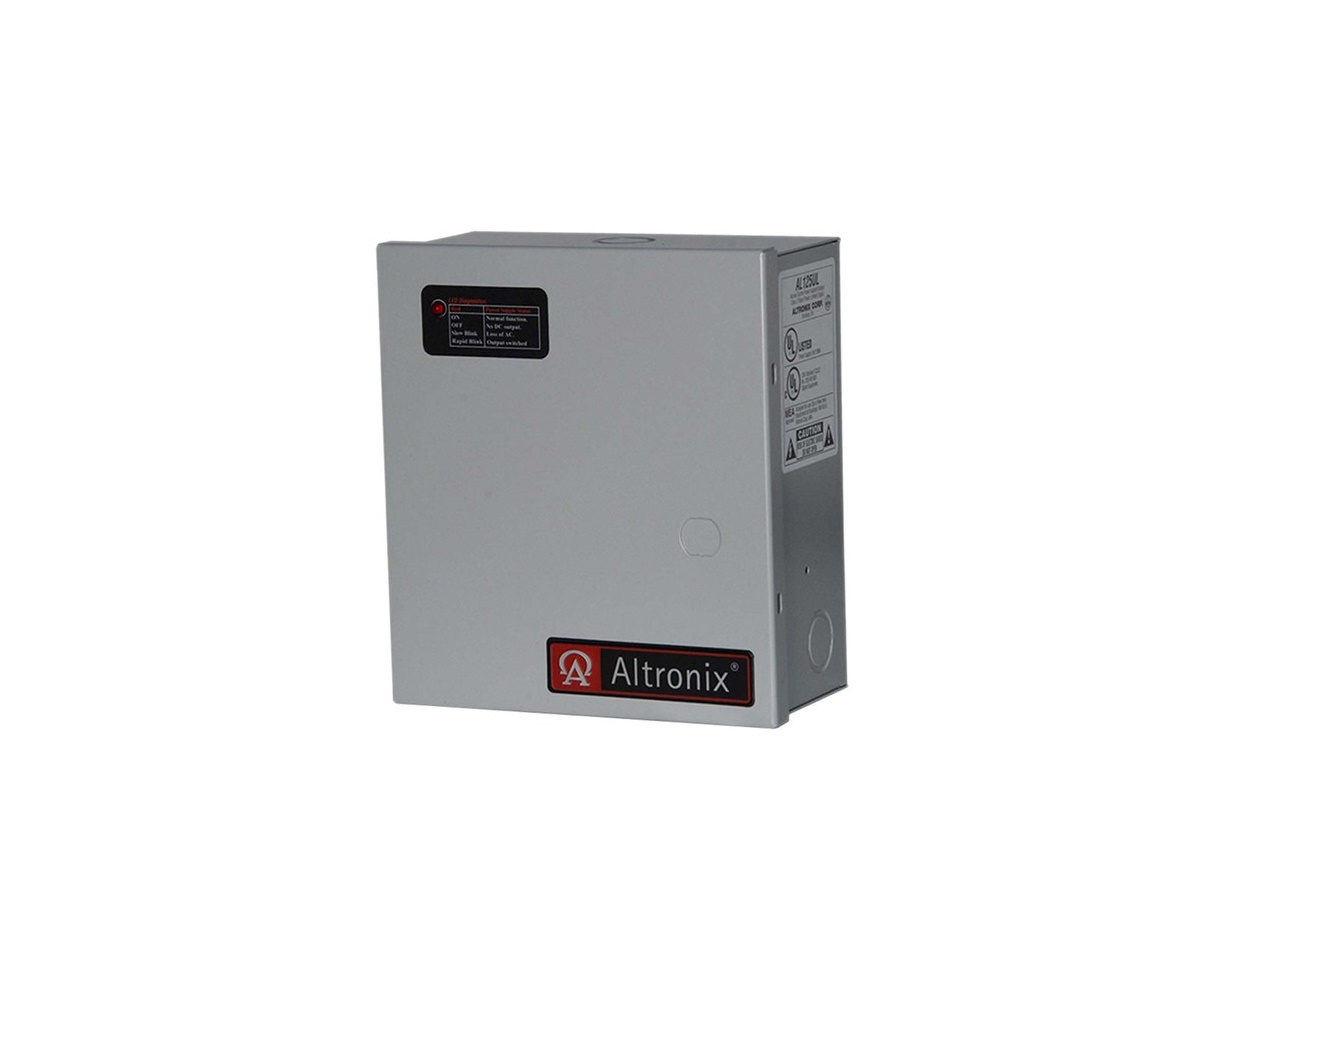 Altronix 115VAC Power Supply/Charger For Access Control AL125UL